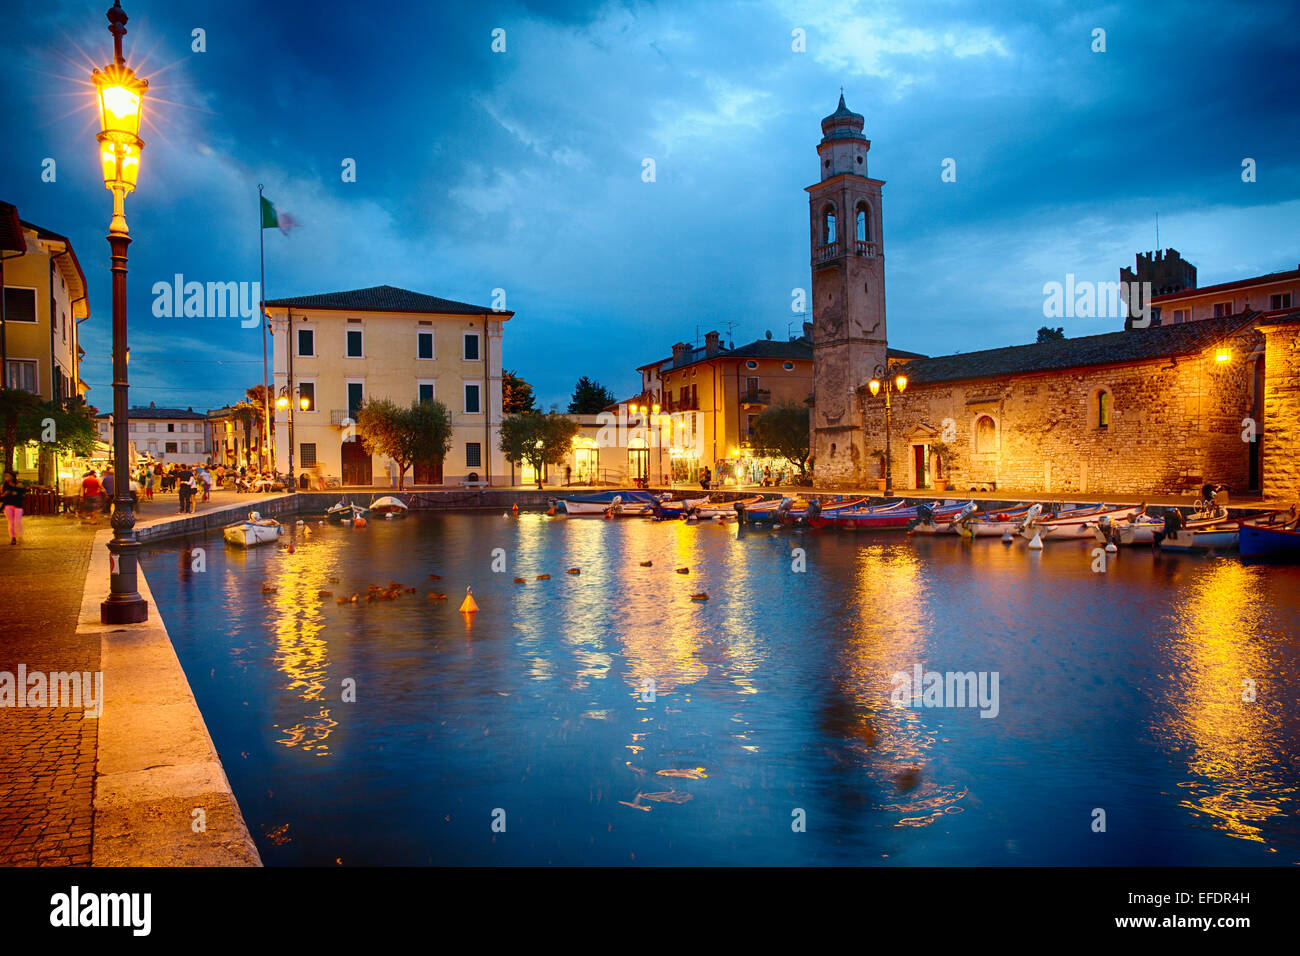 Low Angle View of a Harbor at Night, Lazise, Lake Garda, Lombardy, Italy Stock Photo